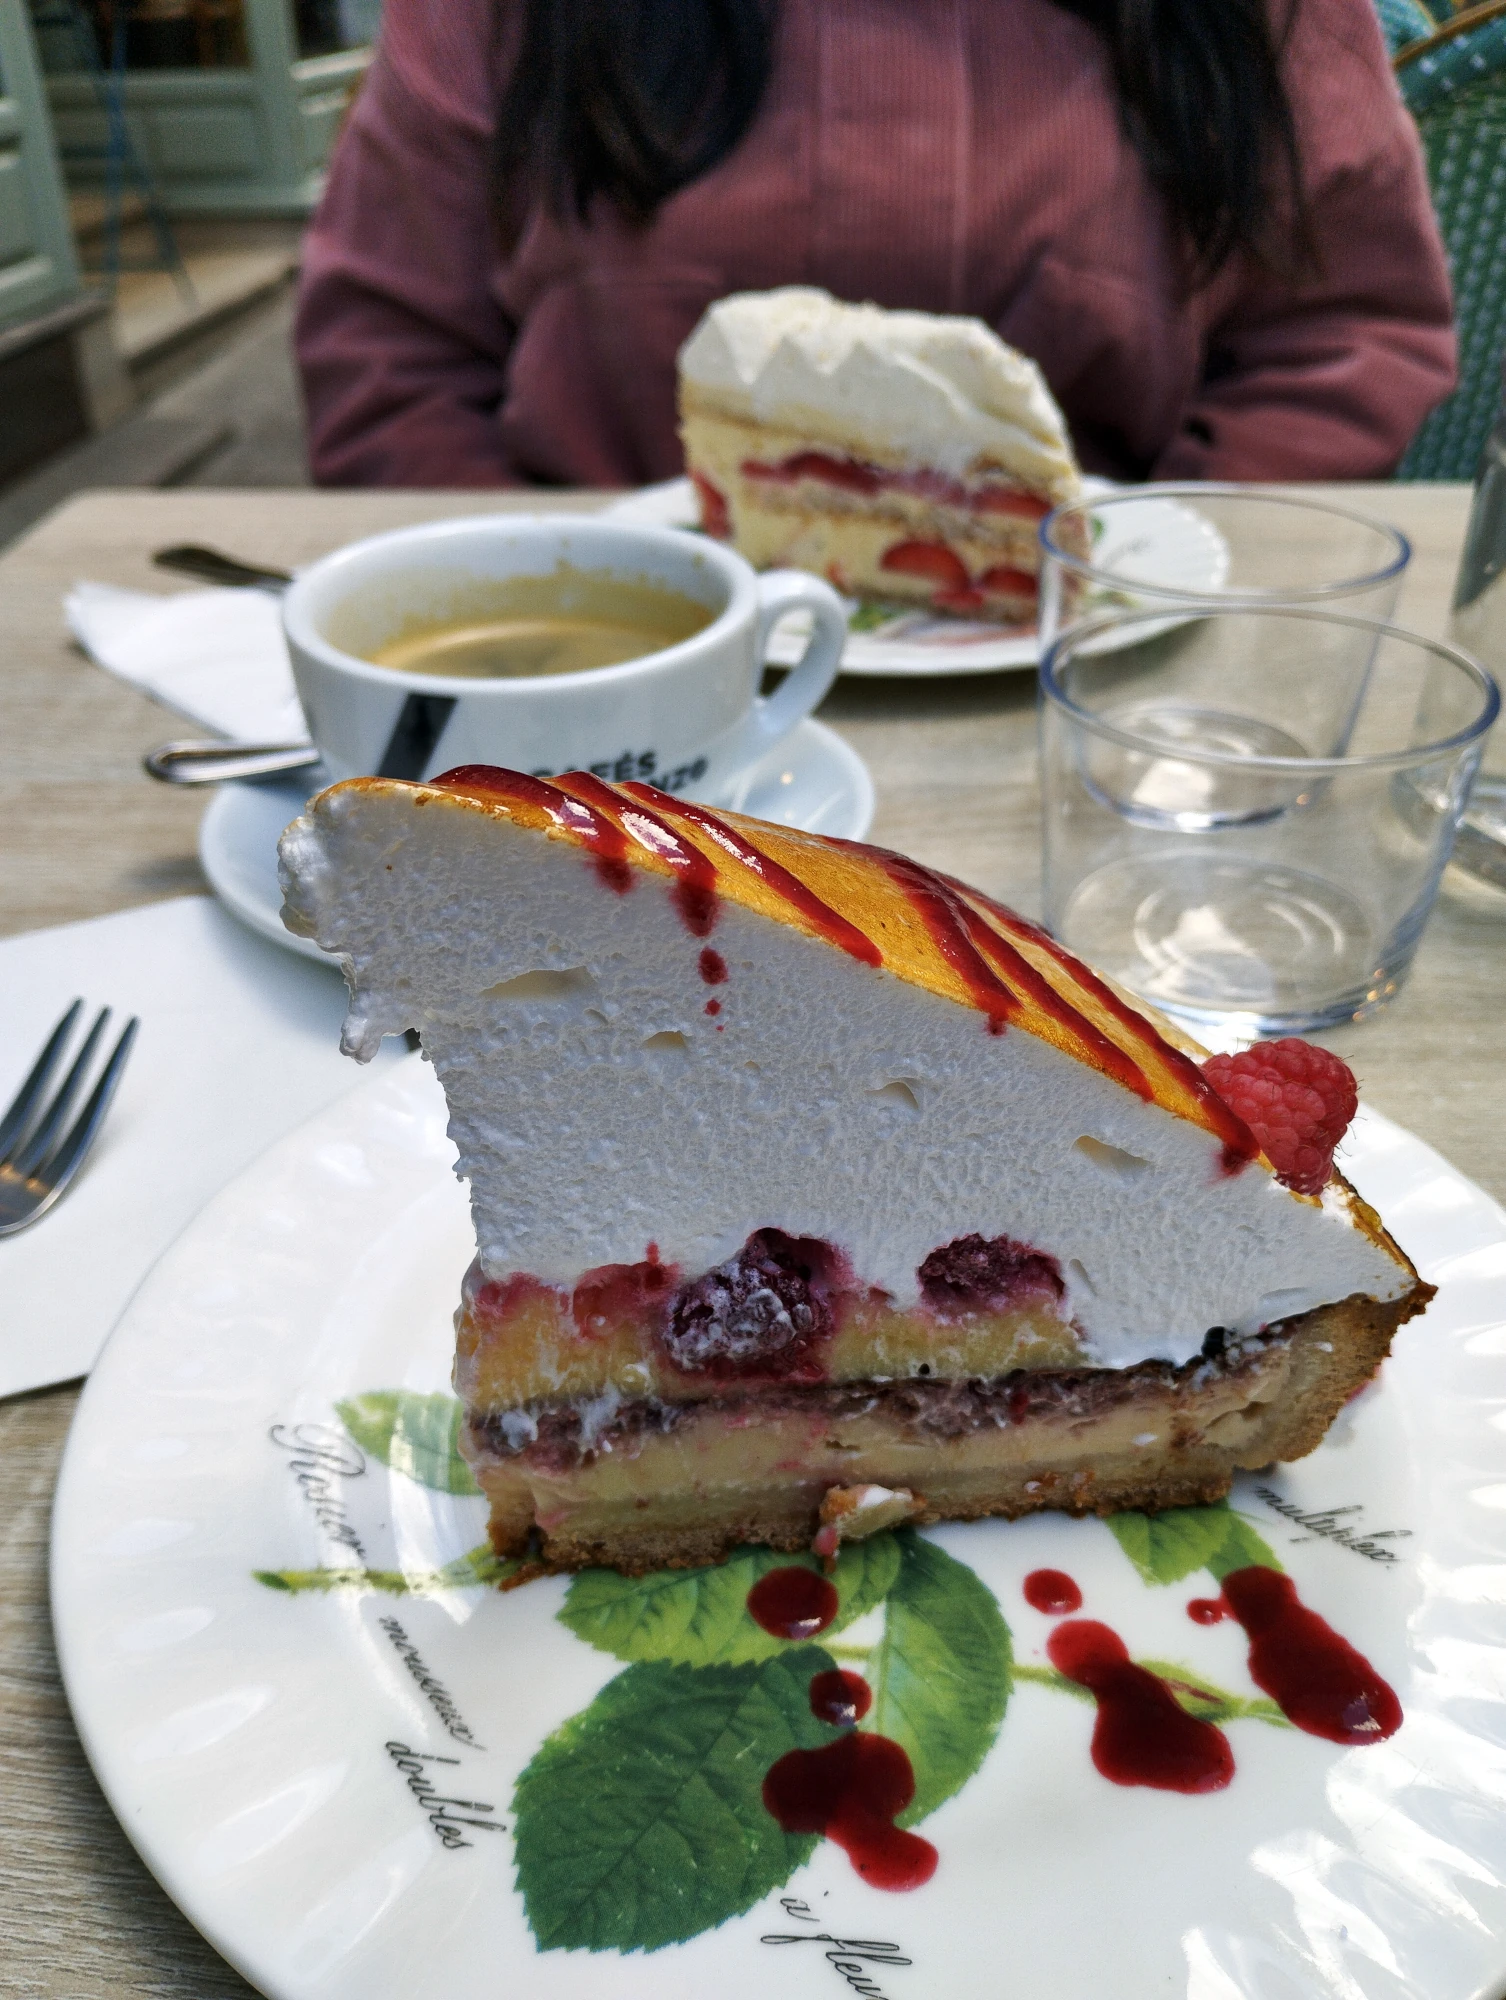 The Best Tea and Cake in Toulouse